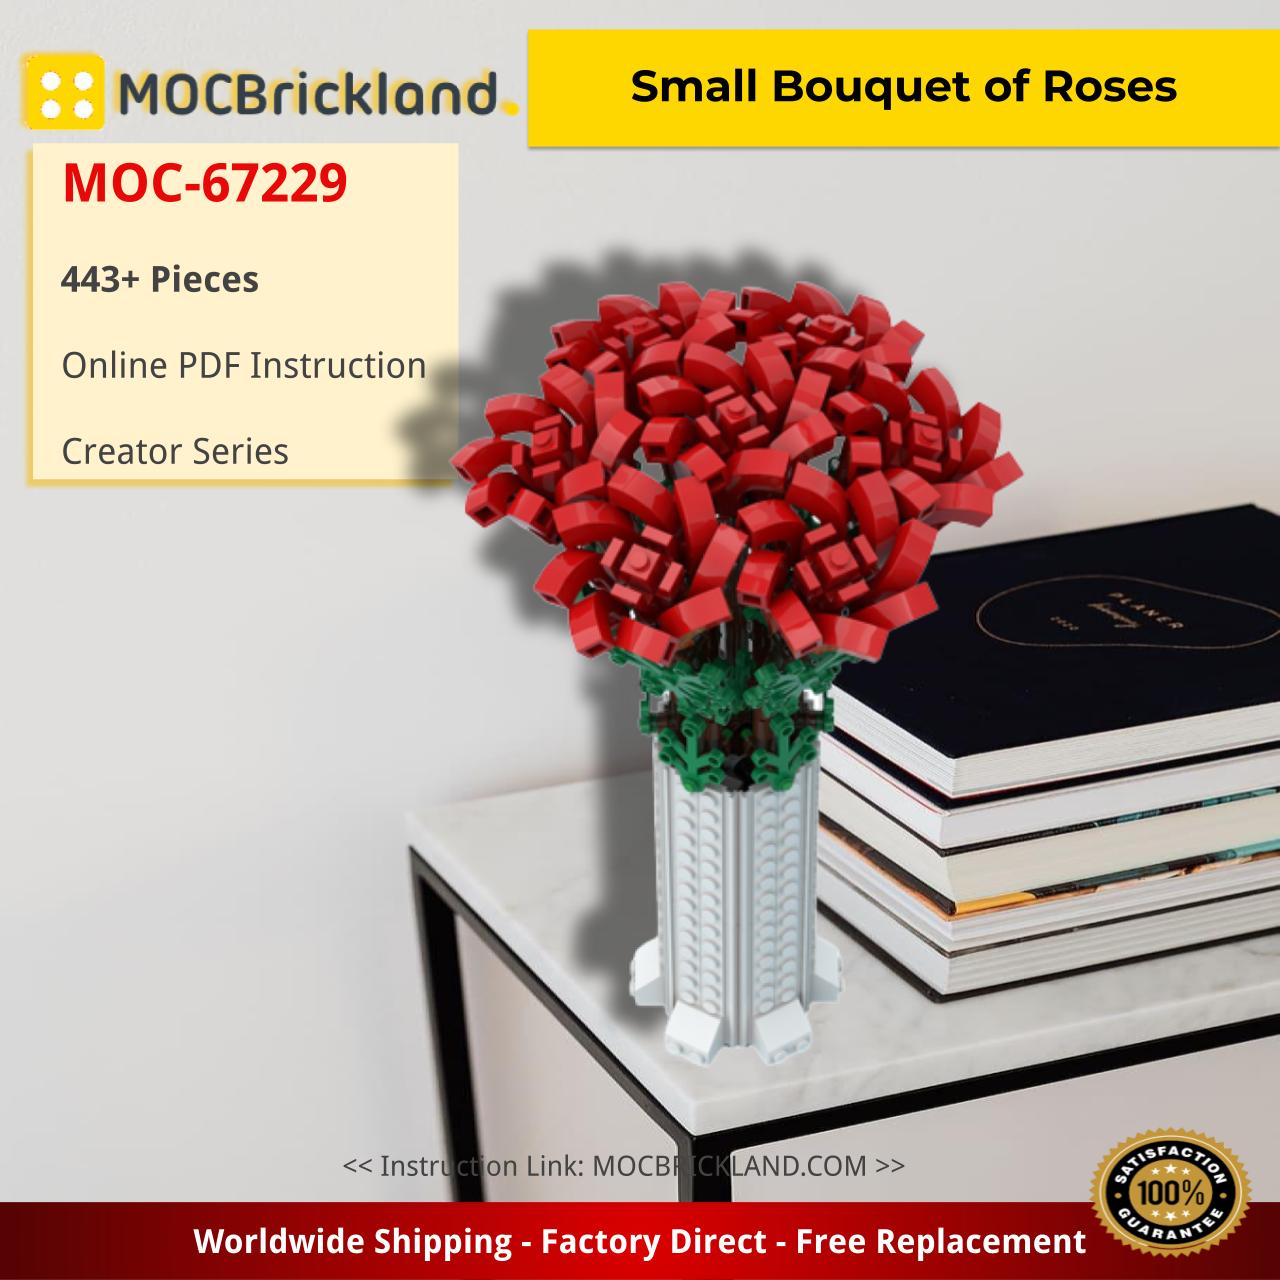 MOCBRICKLAND MOC-67229 Small Bouquet of Roses